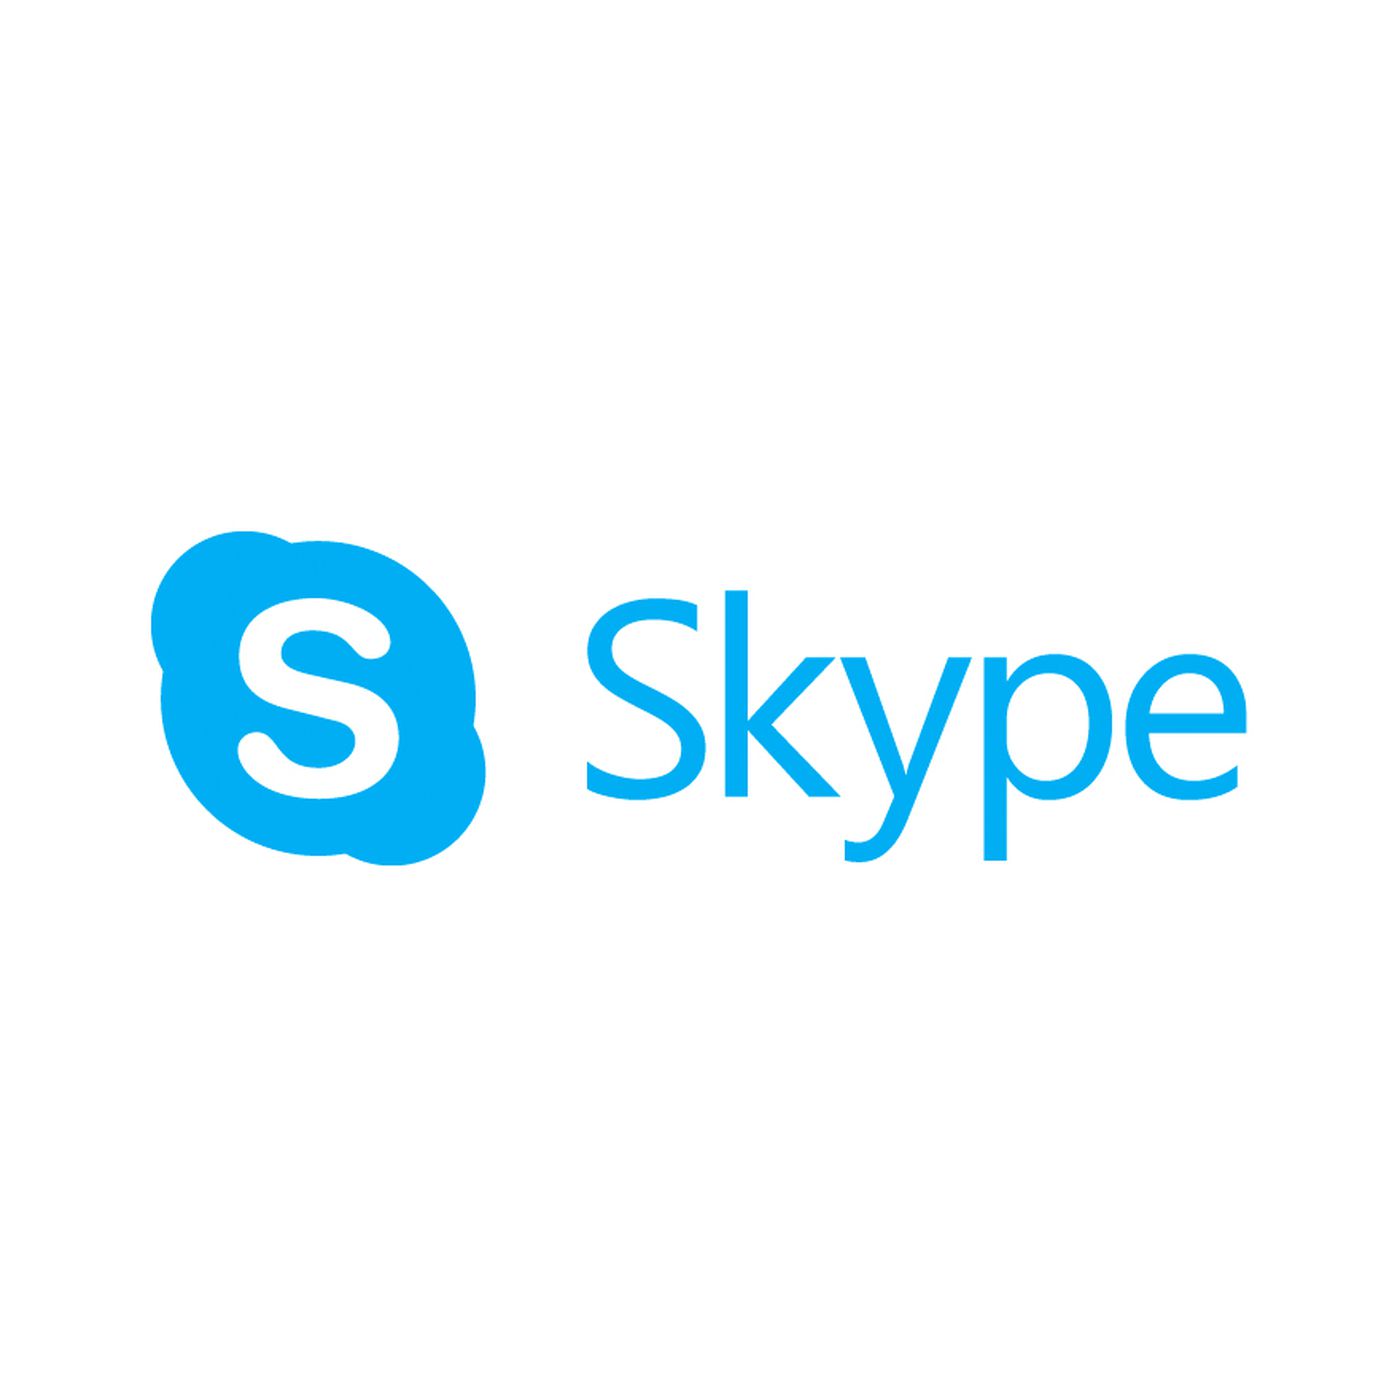 Microsoft's new Skype logo ditches the iconic clouds - The Verge